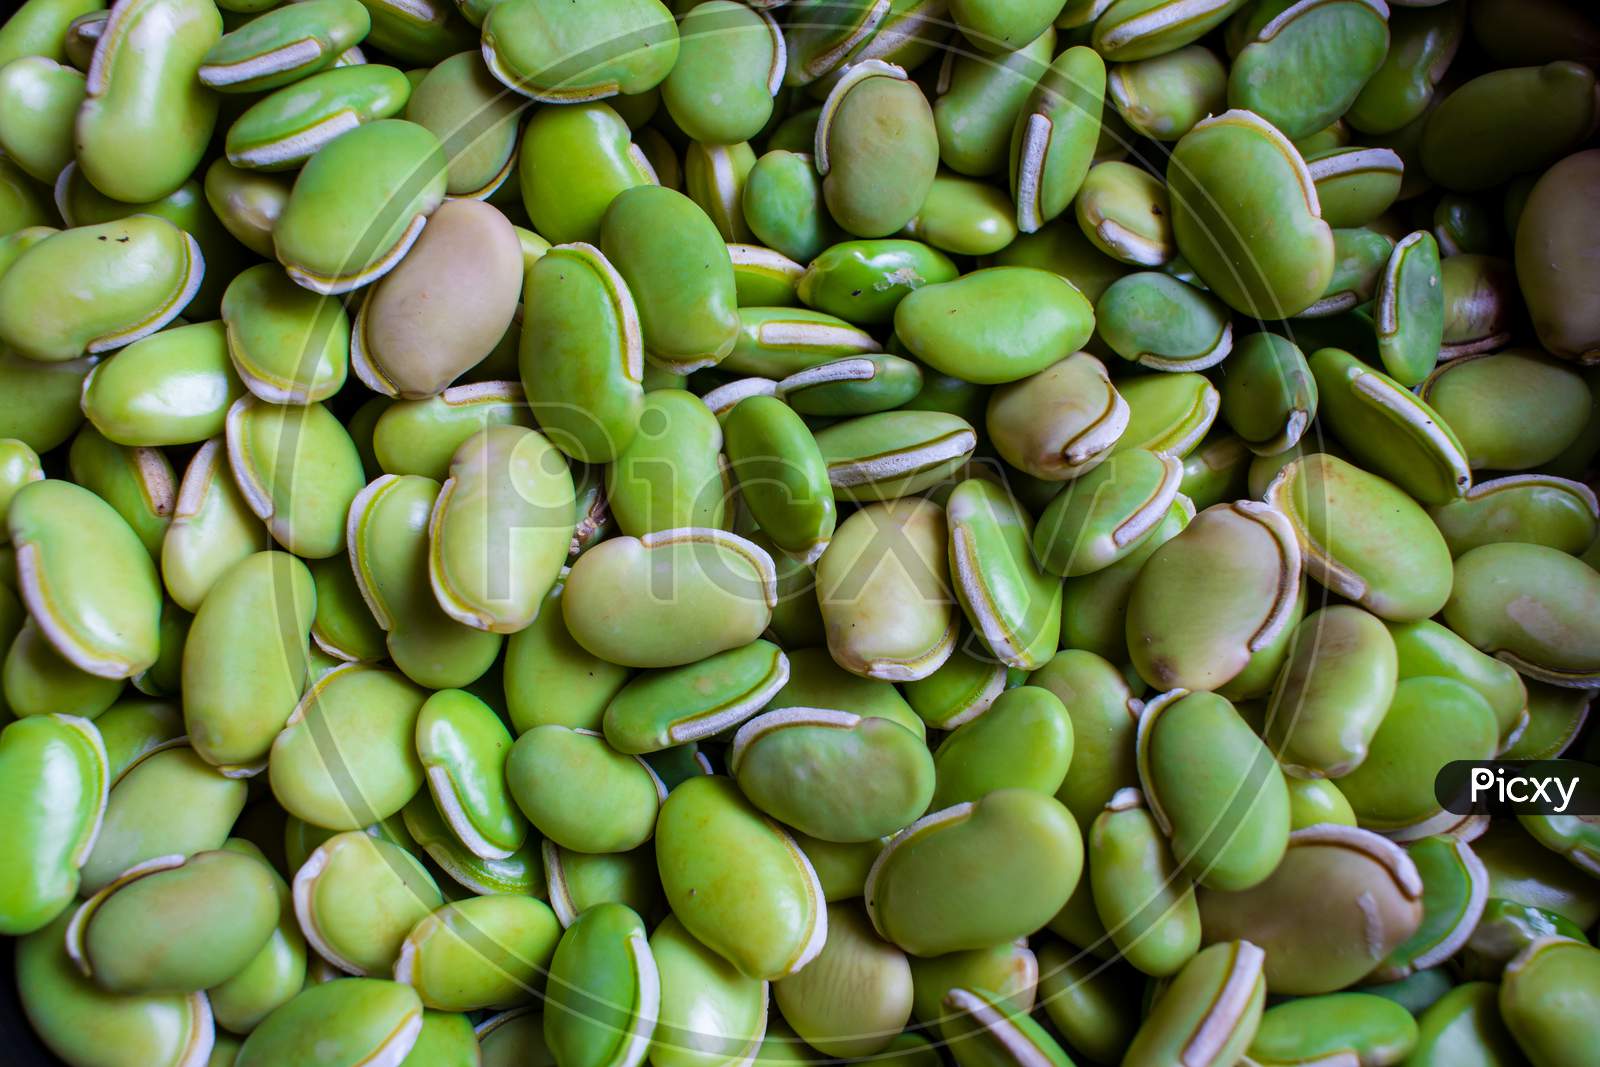 View Of Green Lima Beans (Also Known As Mocha Kottai In Tamil Language).